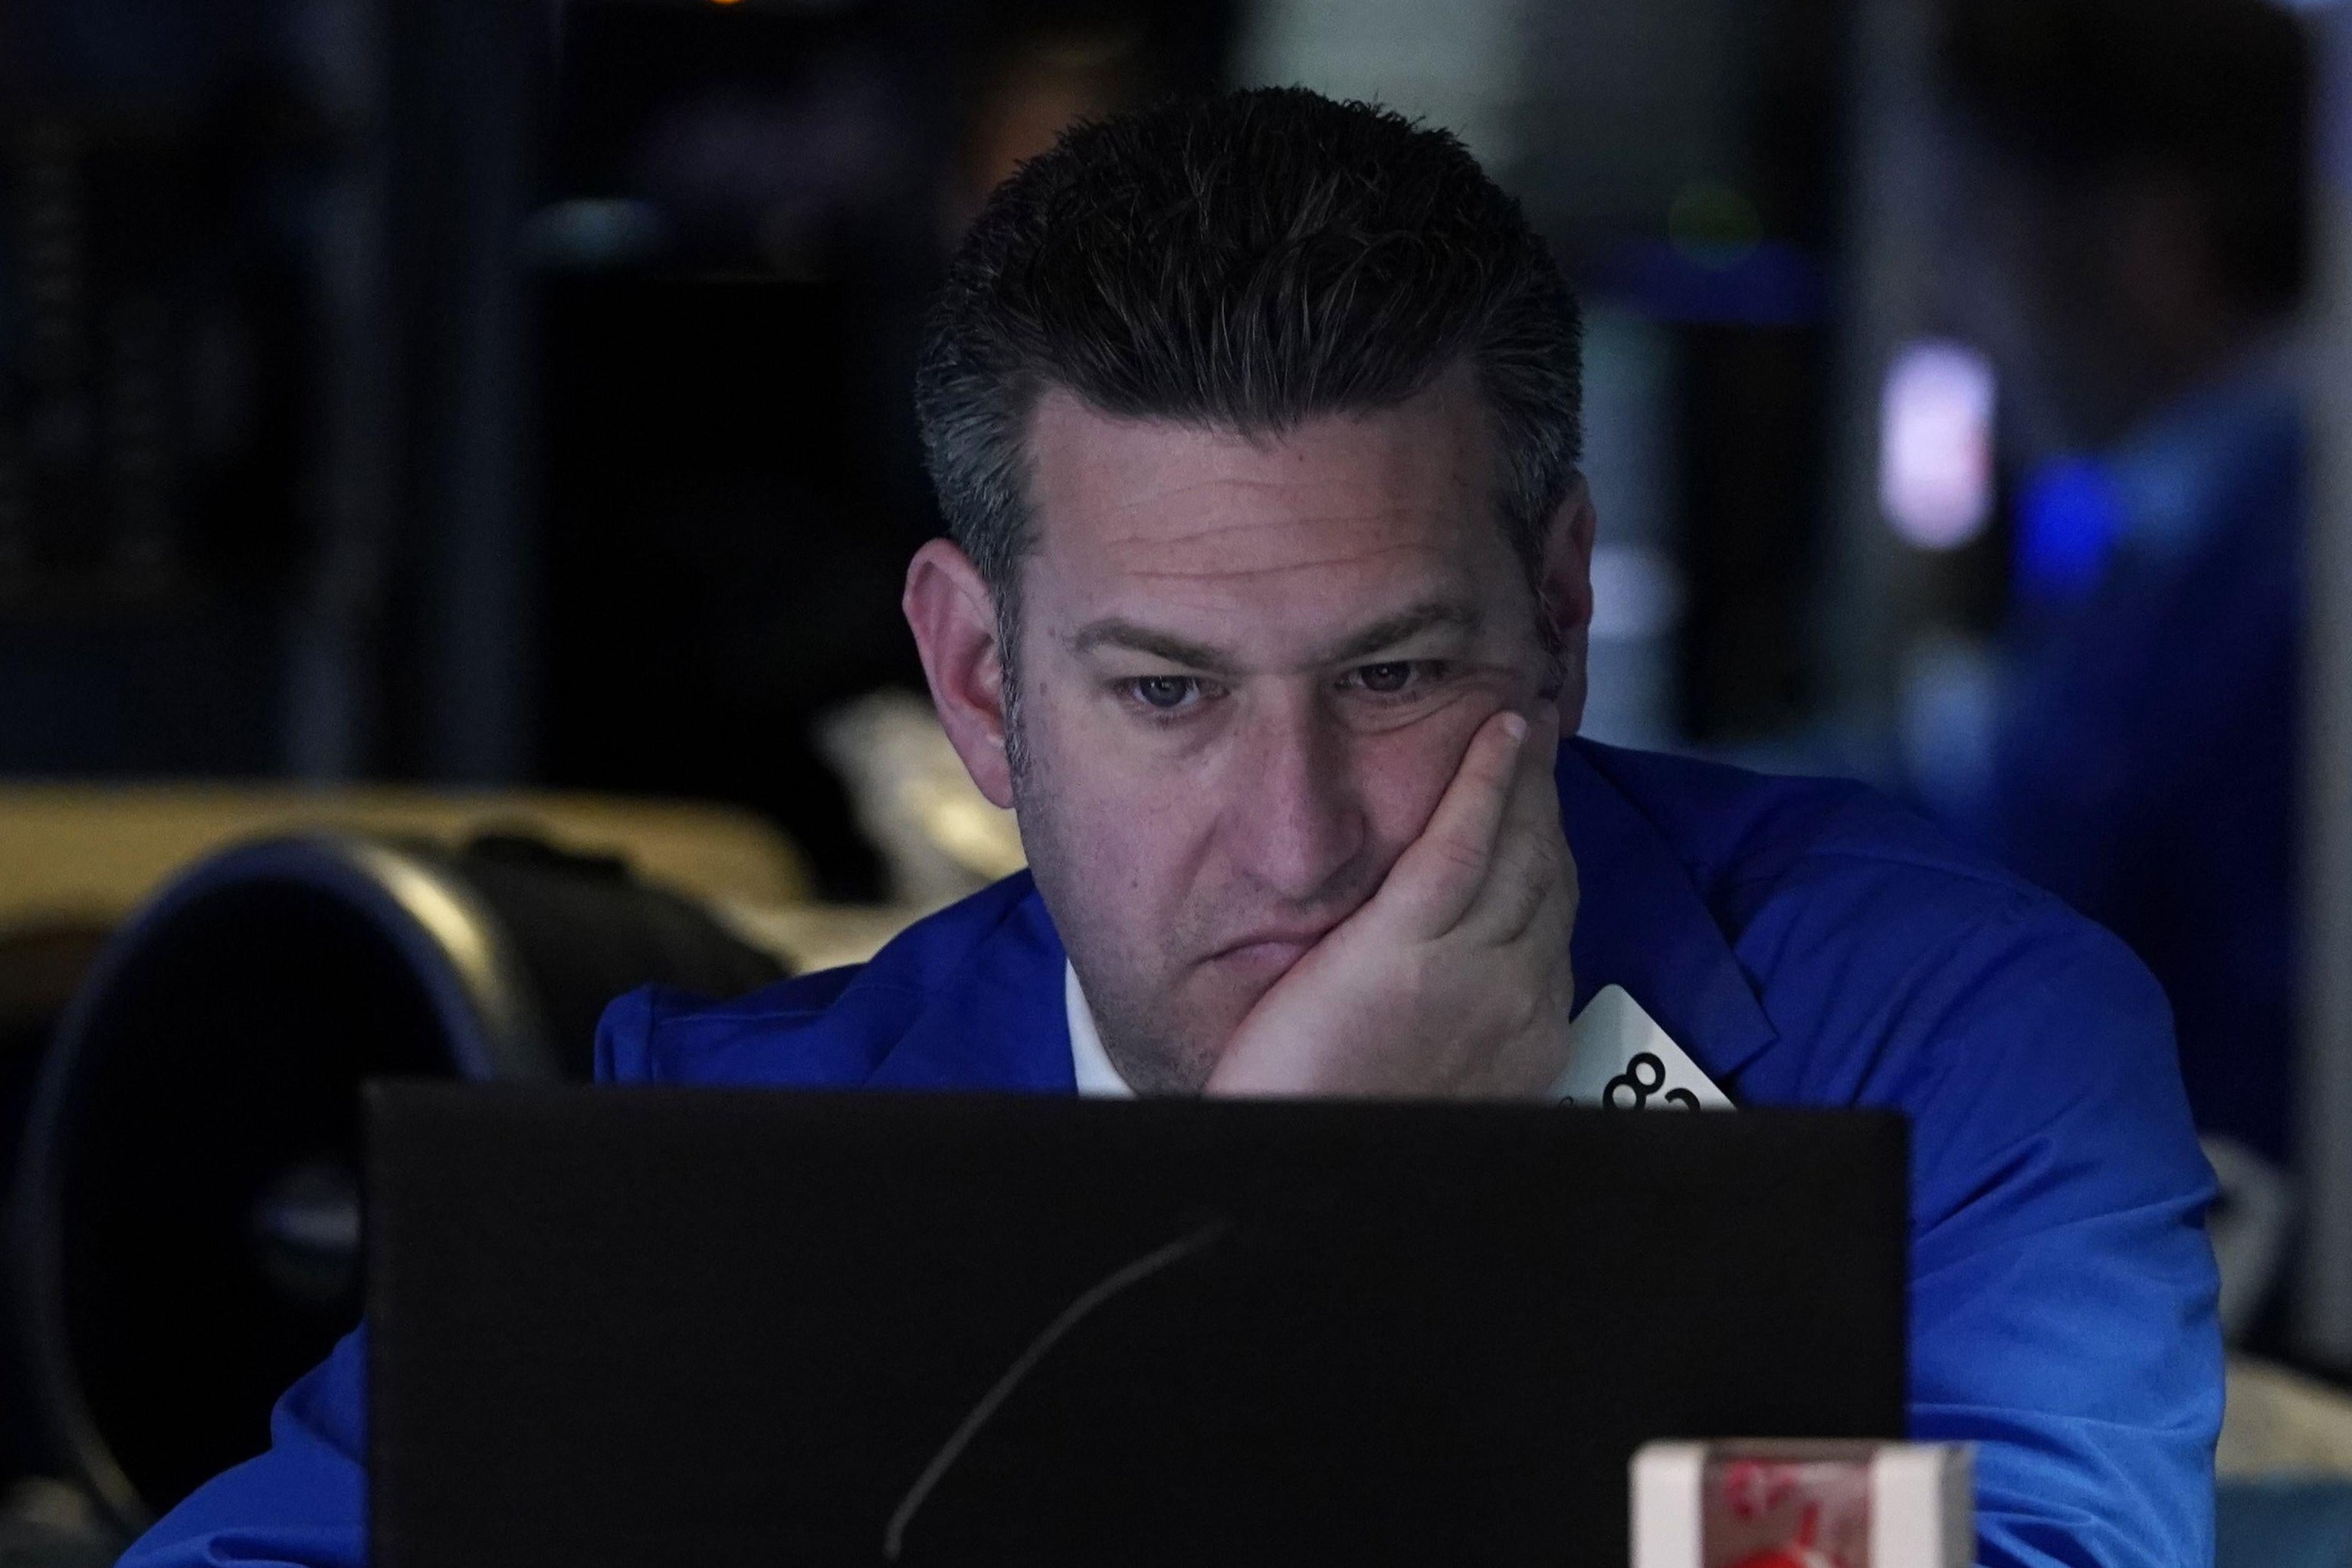 A man in a blue coat sits at a computer with his head in his hand.